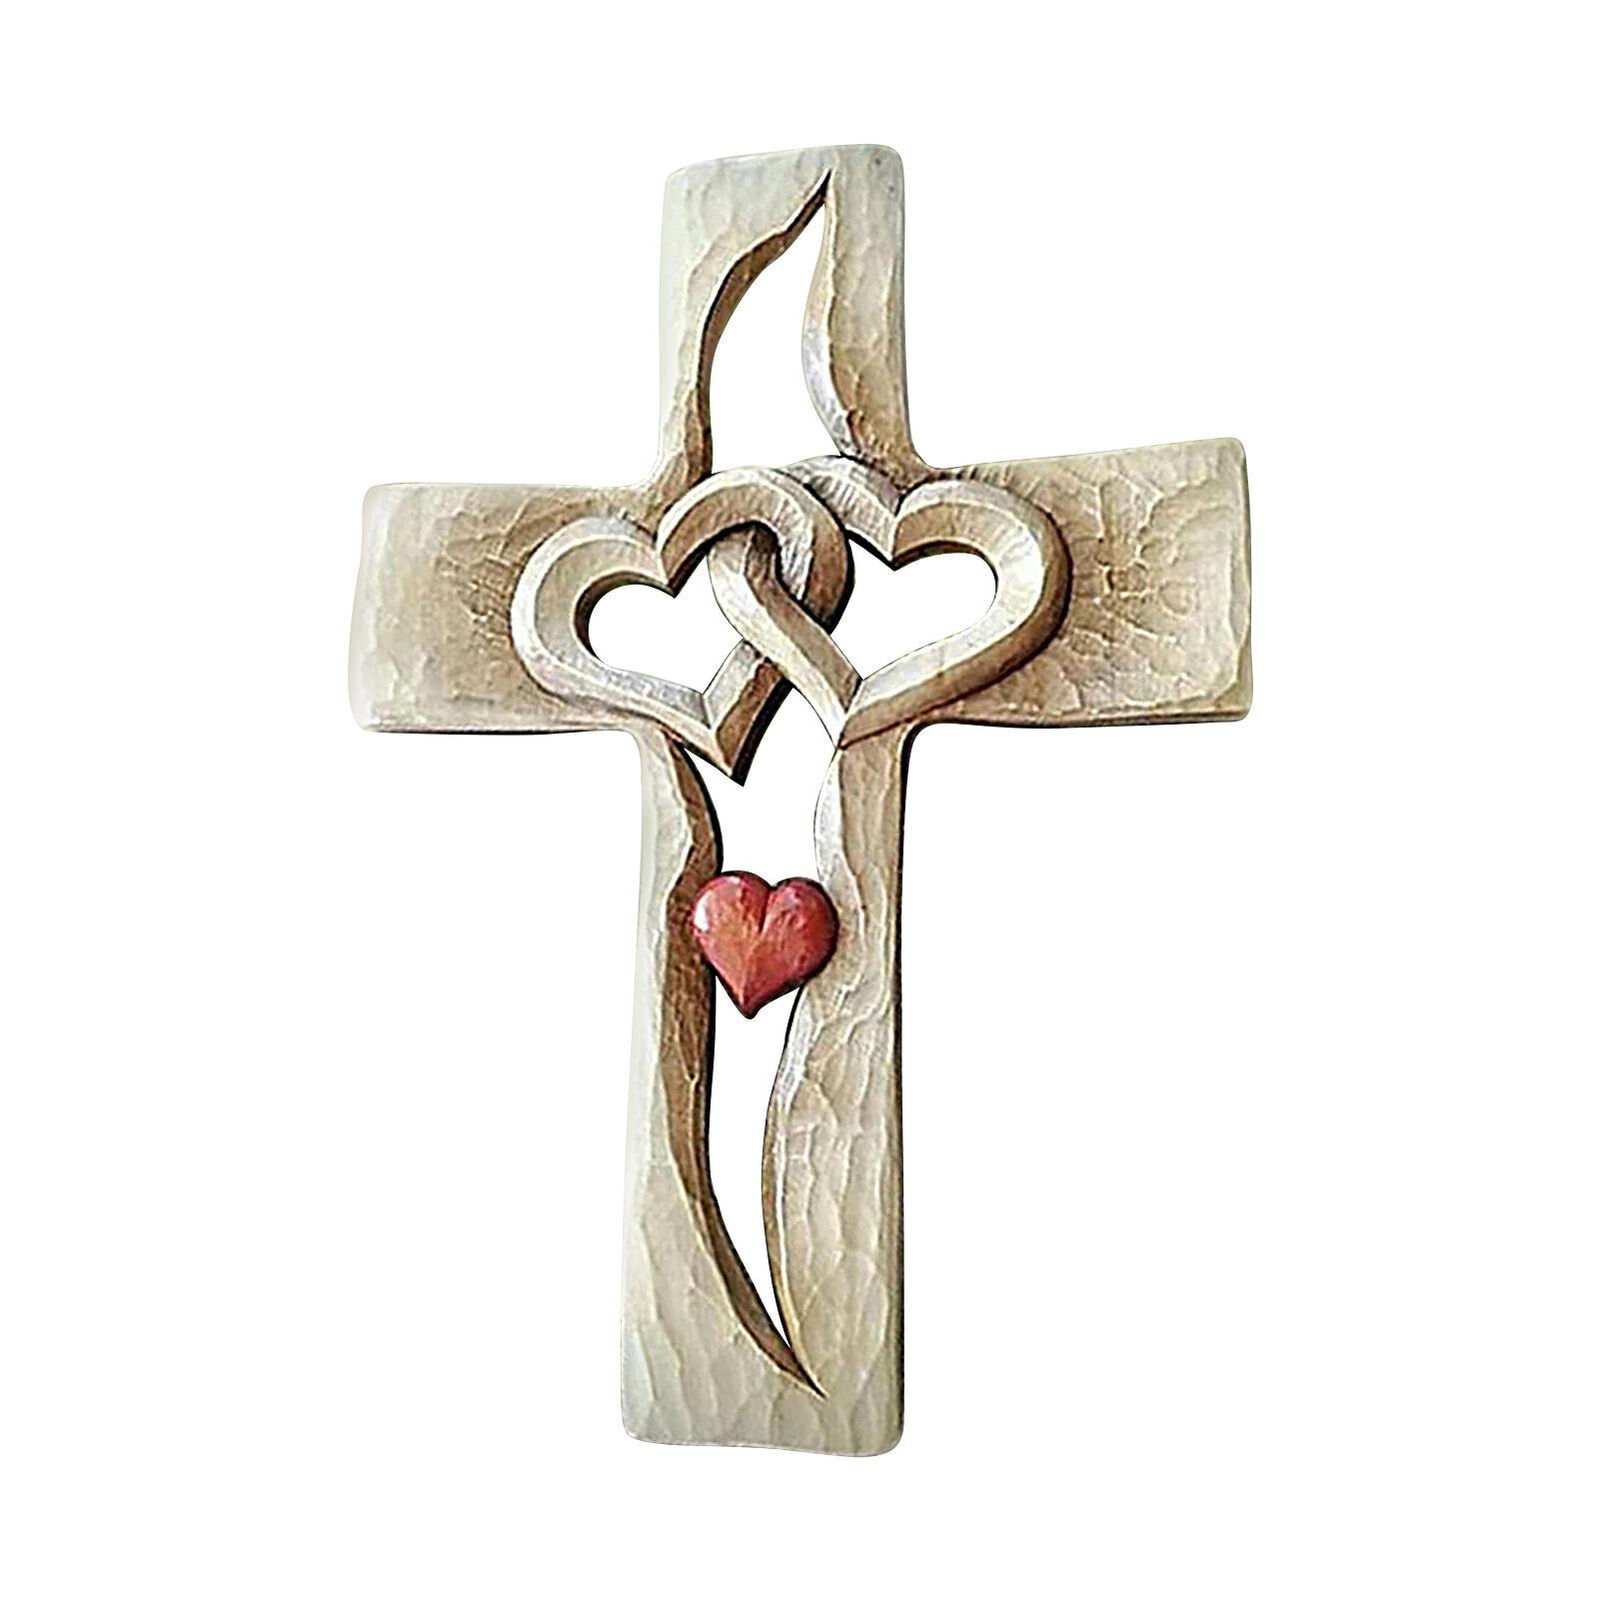 Wooden Entwined Heart Cross Intertwined Hearts Wall Hangings Cross for Home